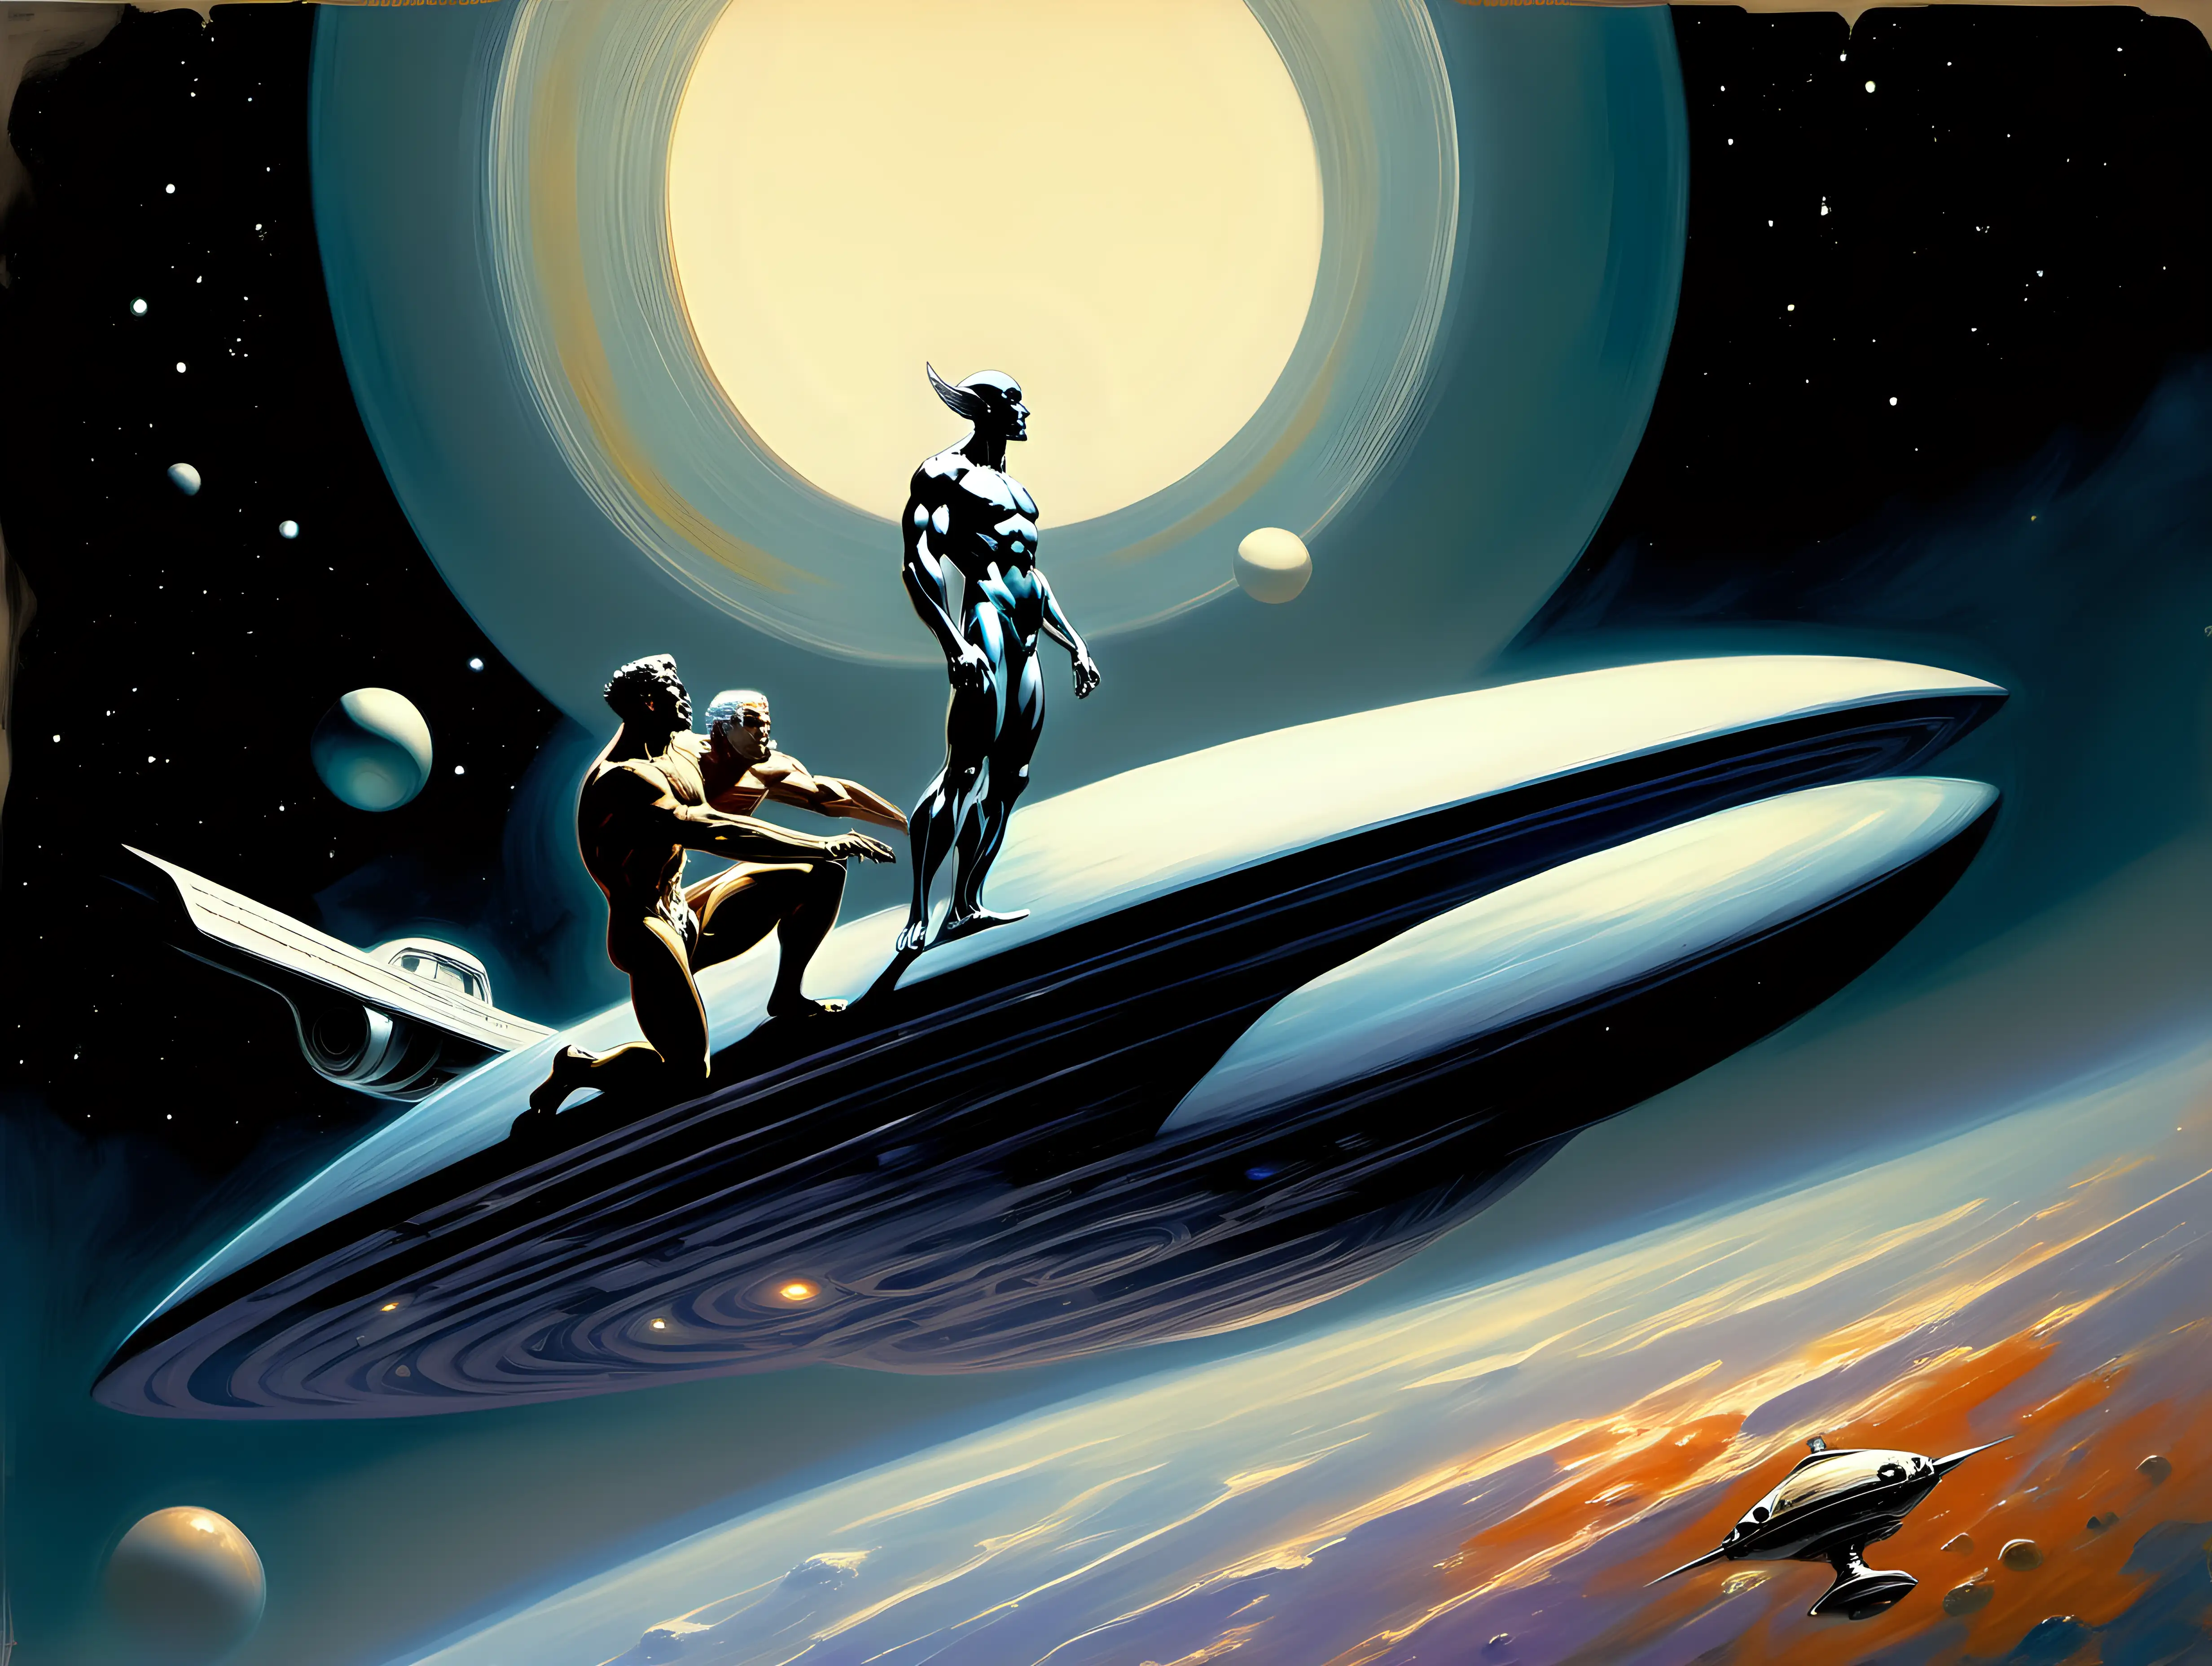 Icarus and Silver Surfer in Epic Space Voyage over Saturn Frank Frazetta Tribute